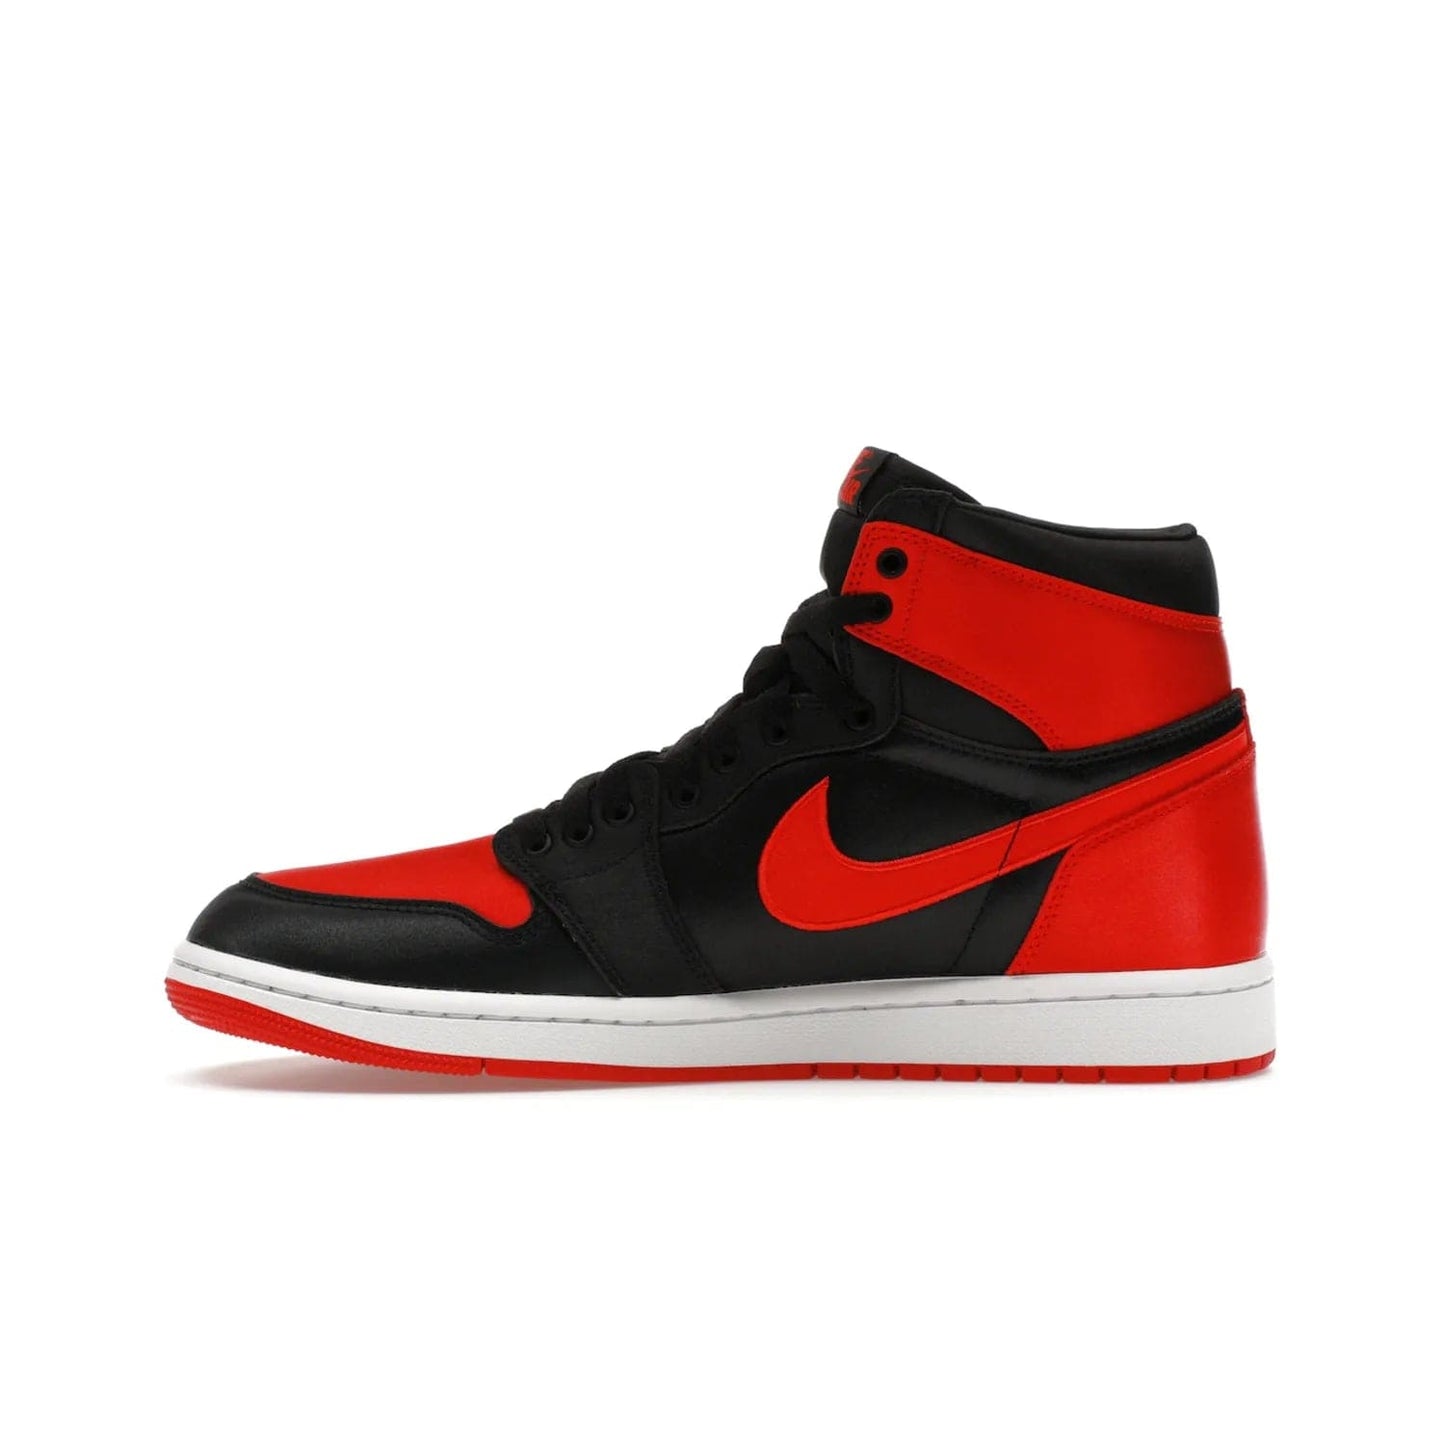 Jordan 1 Retro High OG Satin Bred (Women's) - Image 19 - Only at www.BallersClubKickz.com - Introducing the Jordan 1 Retro High OG Satin Bred (Women's). Luxe satin finish, contrasting hues & classic accents. Trending sneakers symbolizing timelessness & heritage. Make a bold statement with this iconic shoe. Available October 4, 2023.